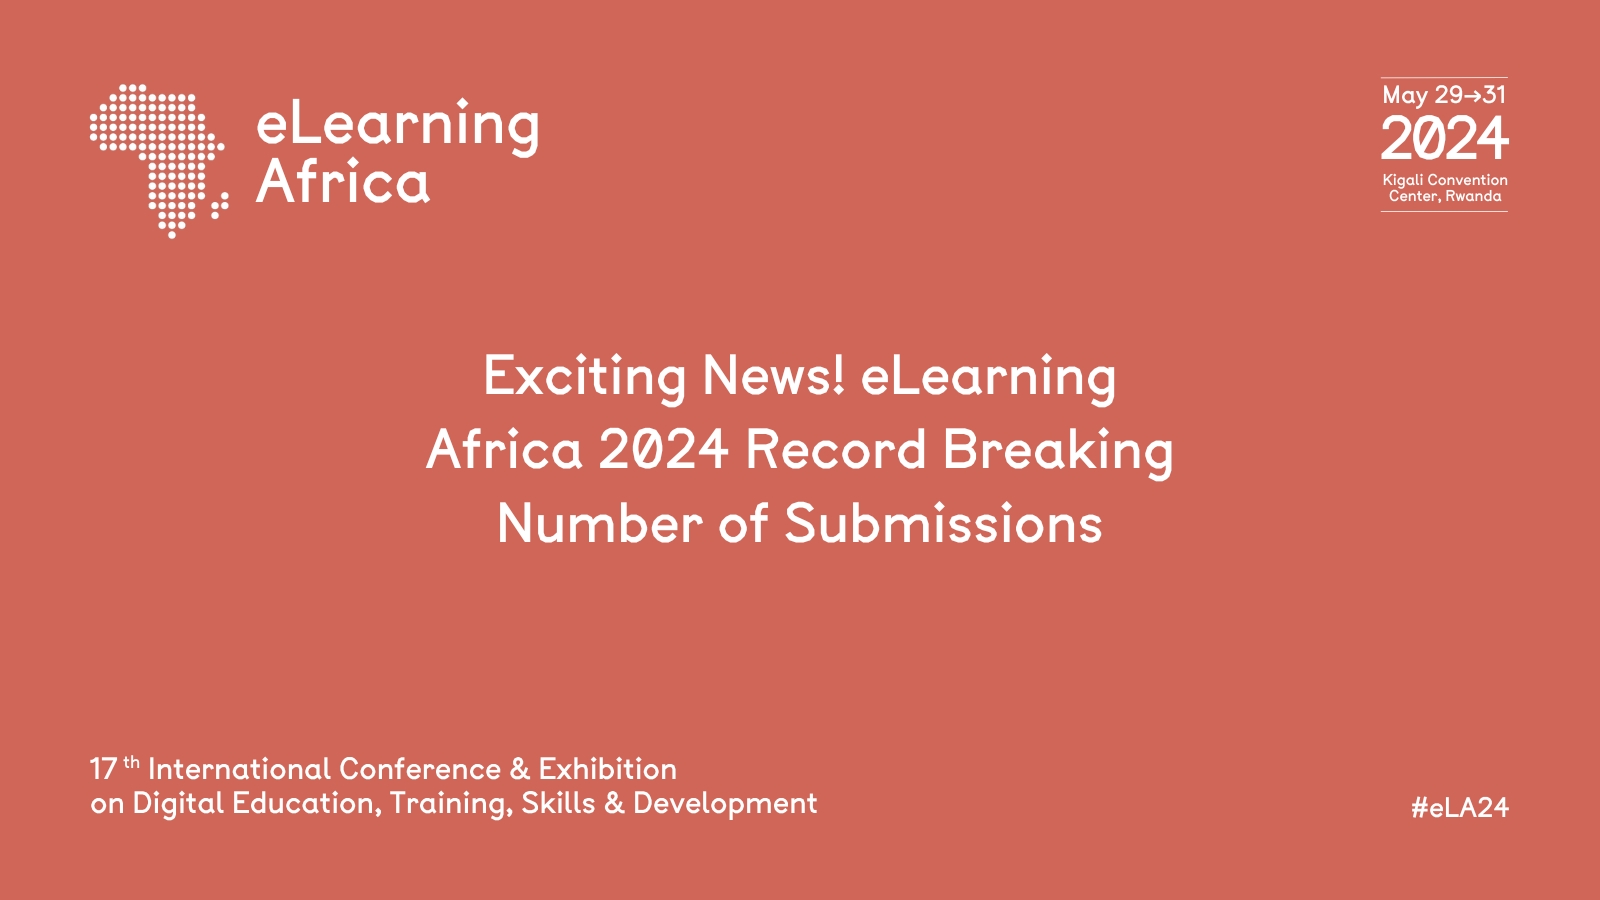 eLearning Africa 2024 RecordBreaking Number of Submissions